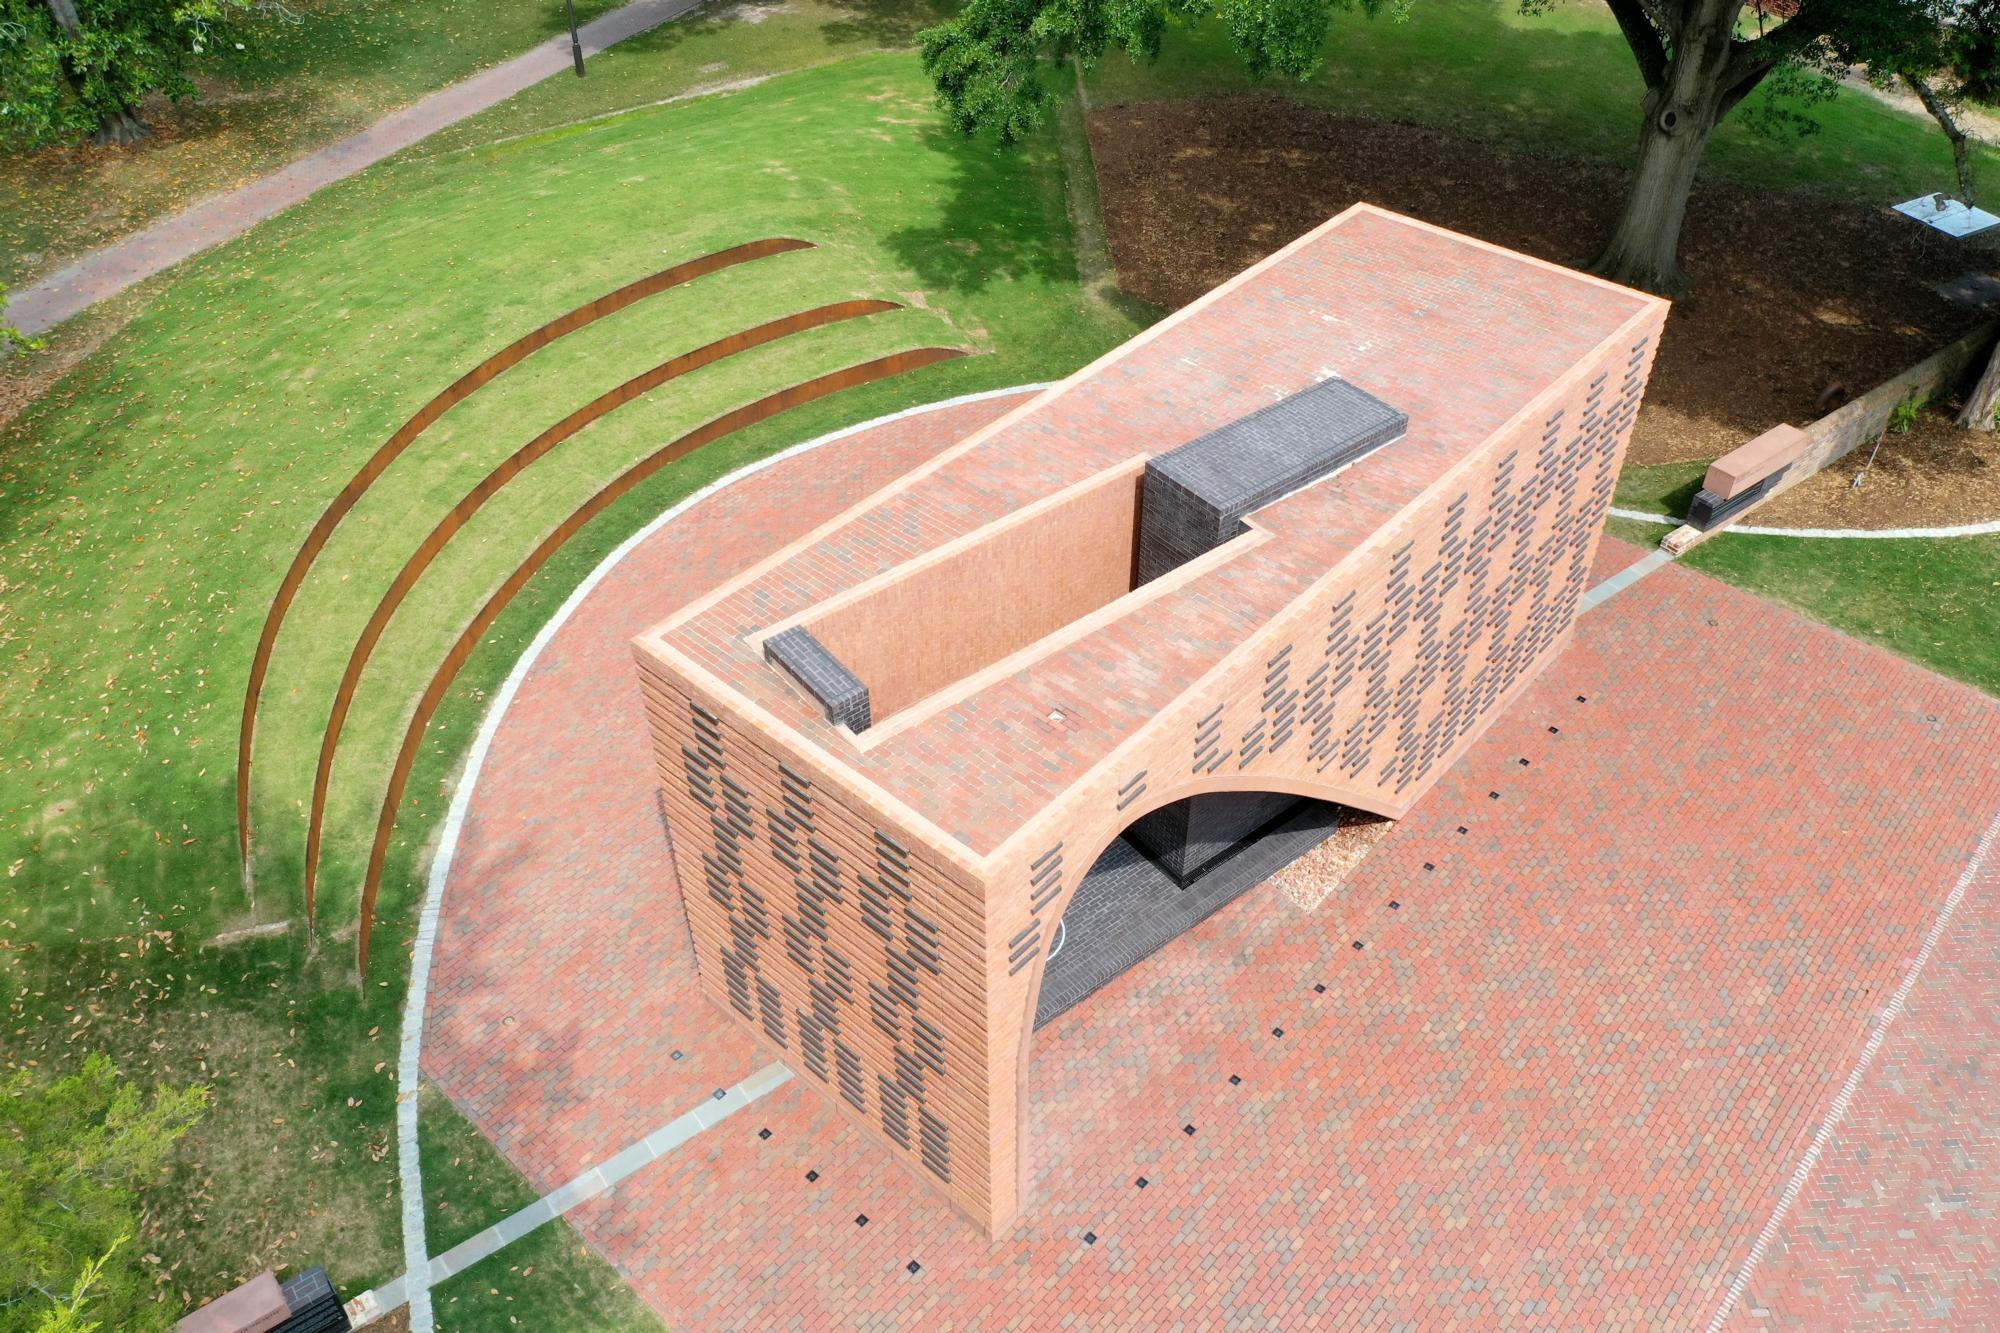 The red bricked memorial known as Hearth, Memorial to the Enslaved